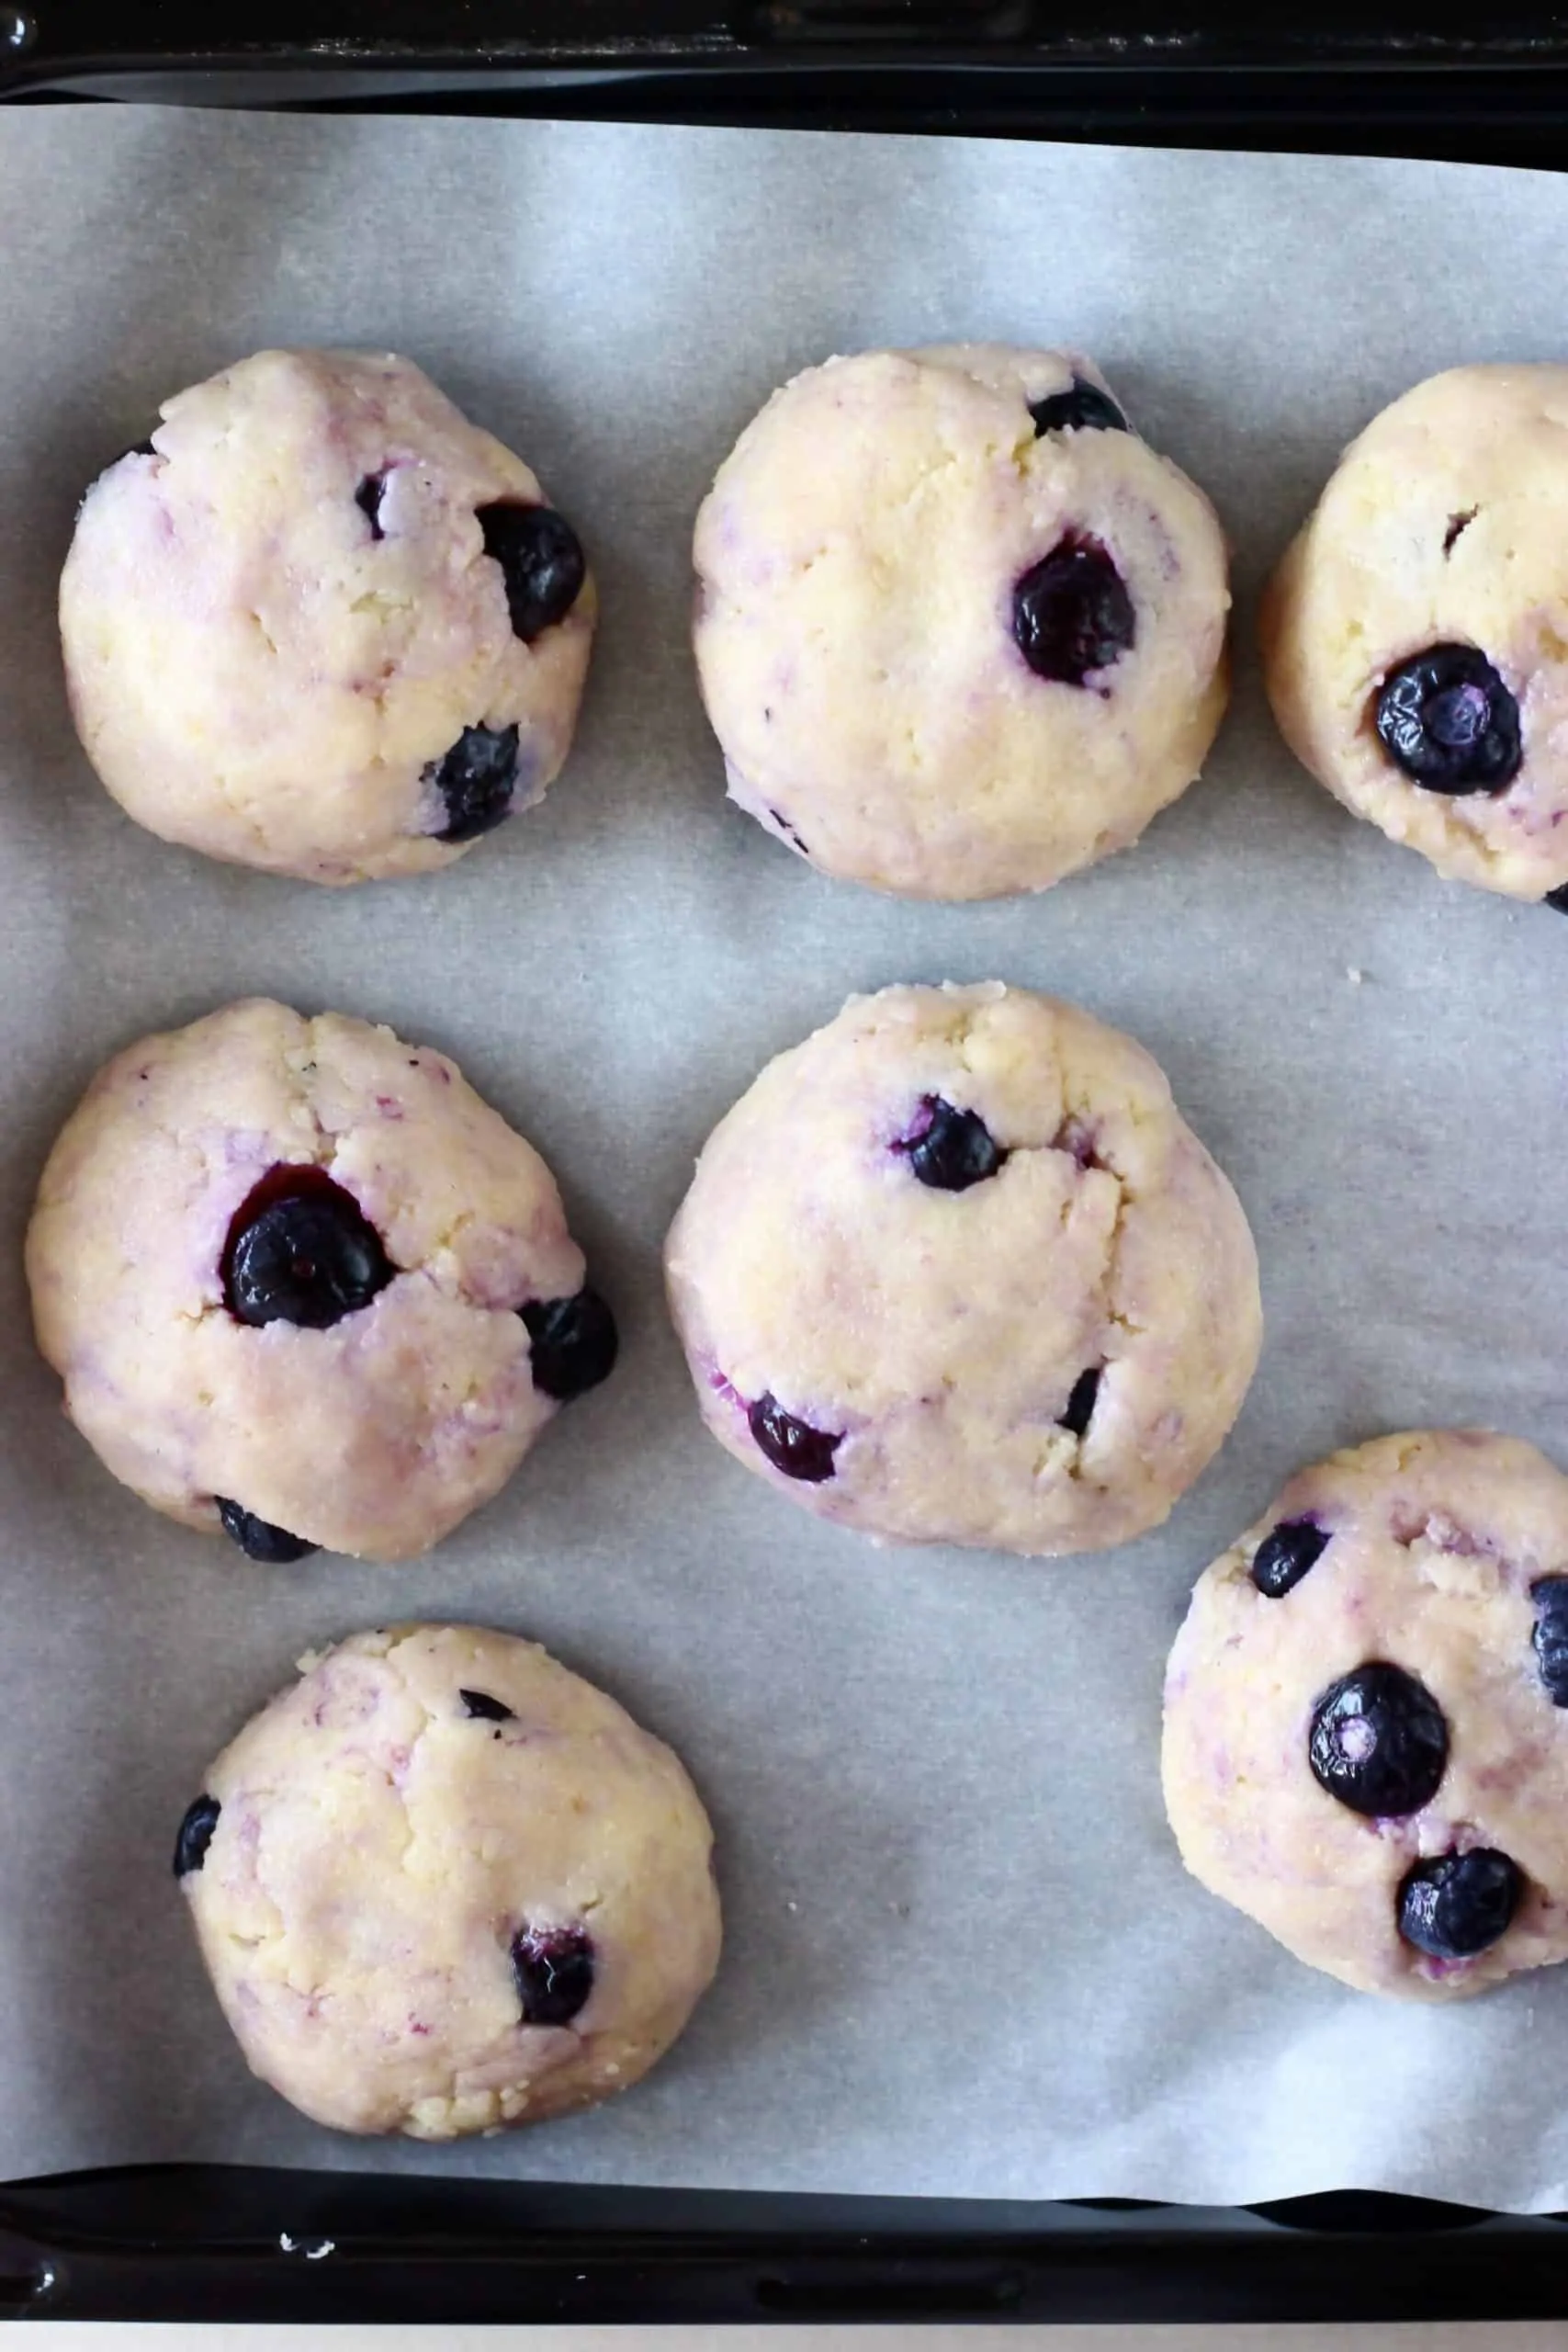 Seven raw gluten-free vegan lemon blueberry cookies on a baking tray lined with baking paper